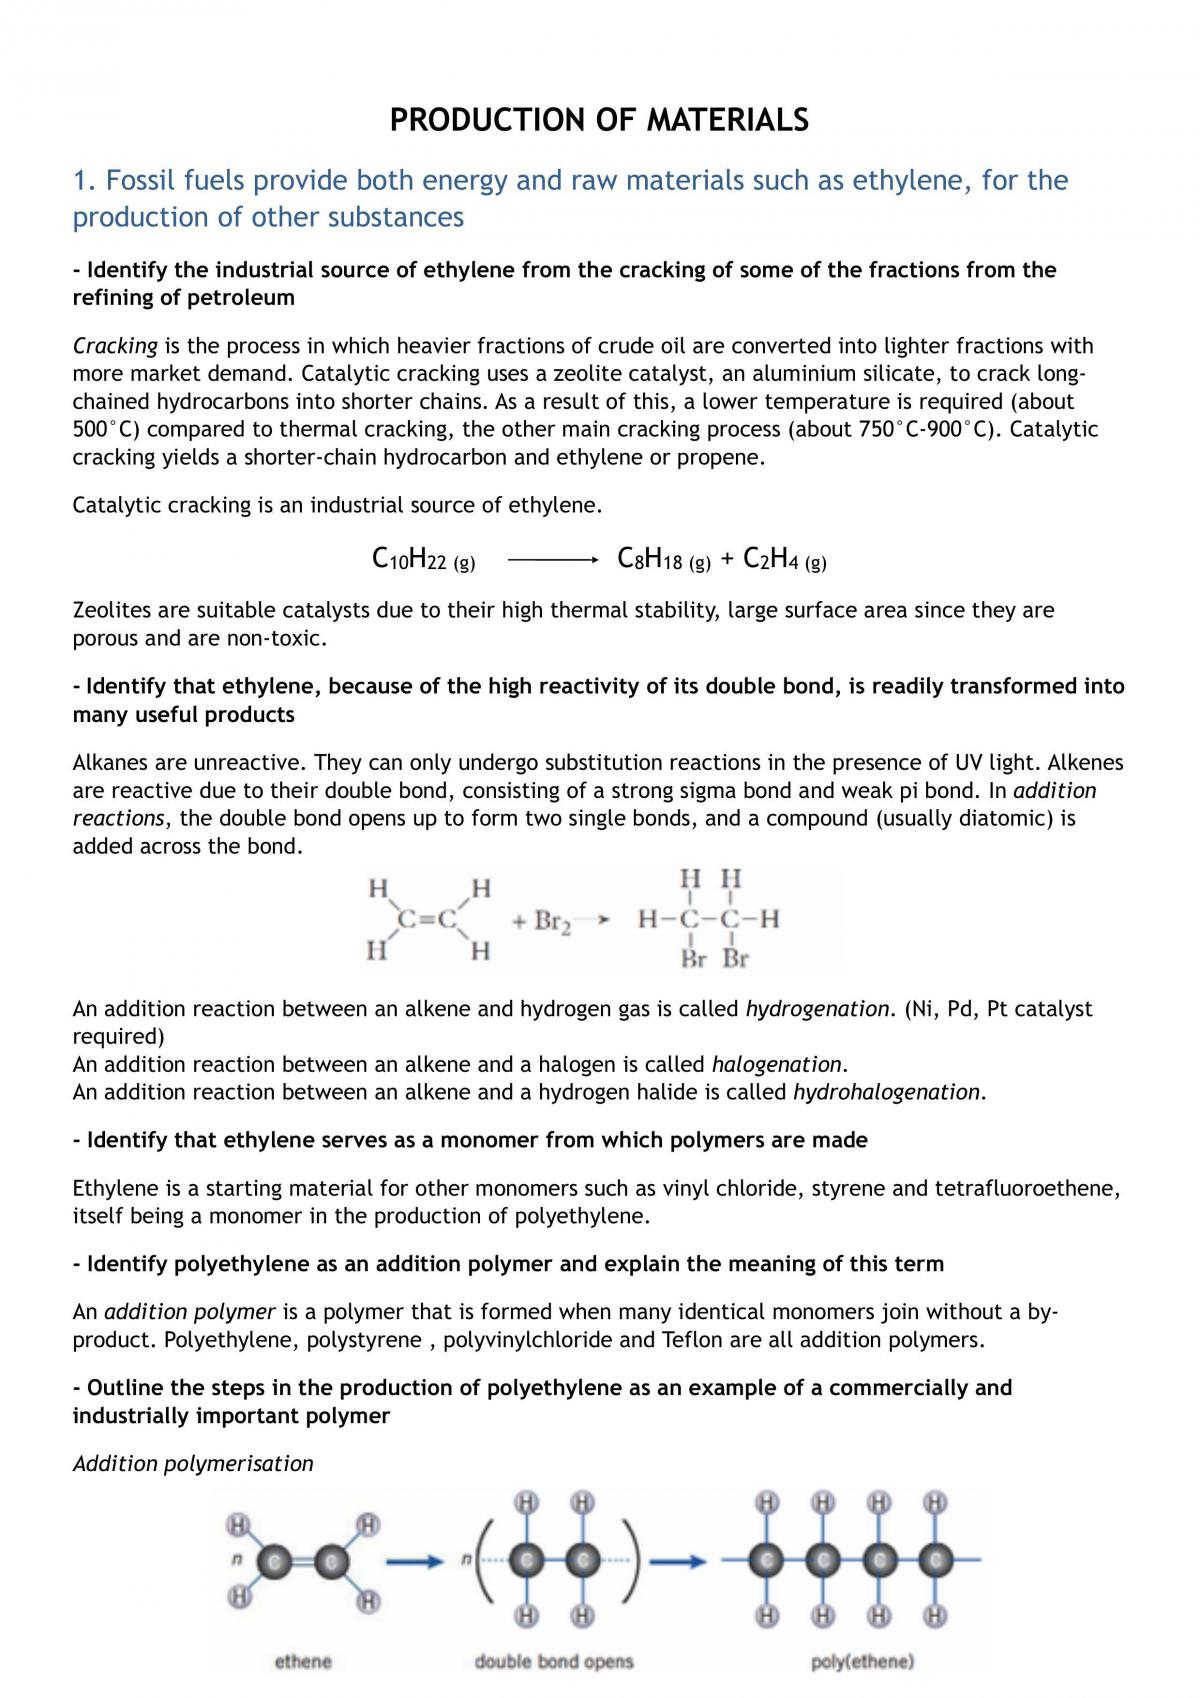 HSC Chemistry notes on Production of Materials | Chemistry - Year 12 ...